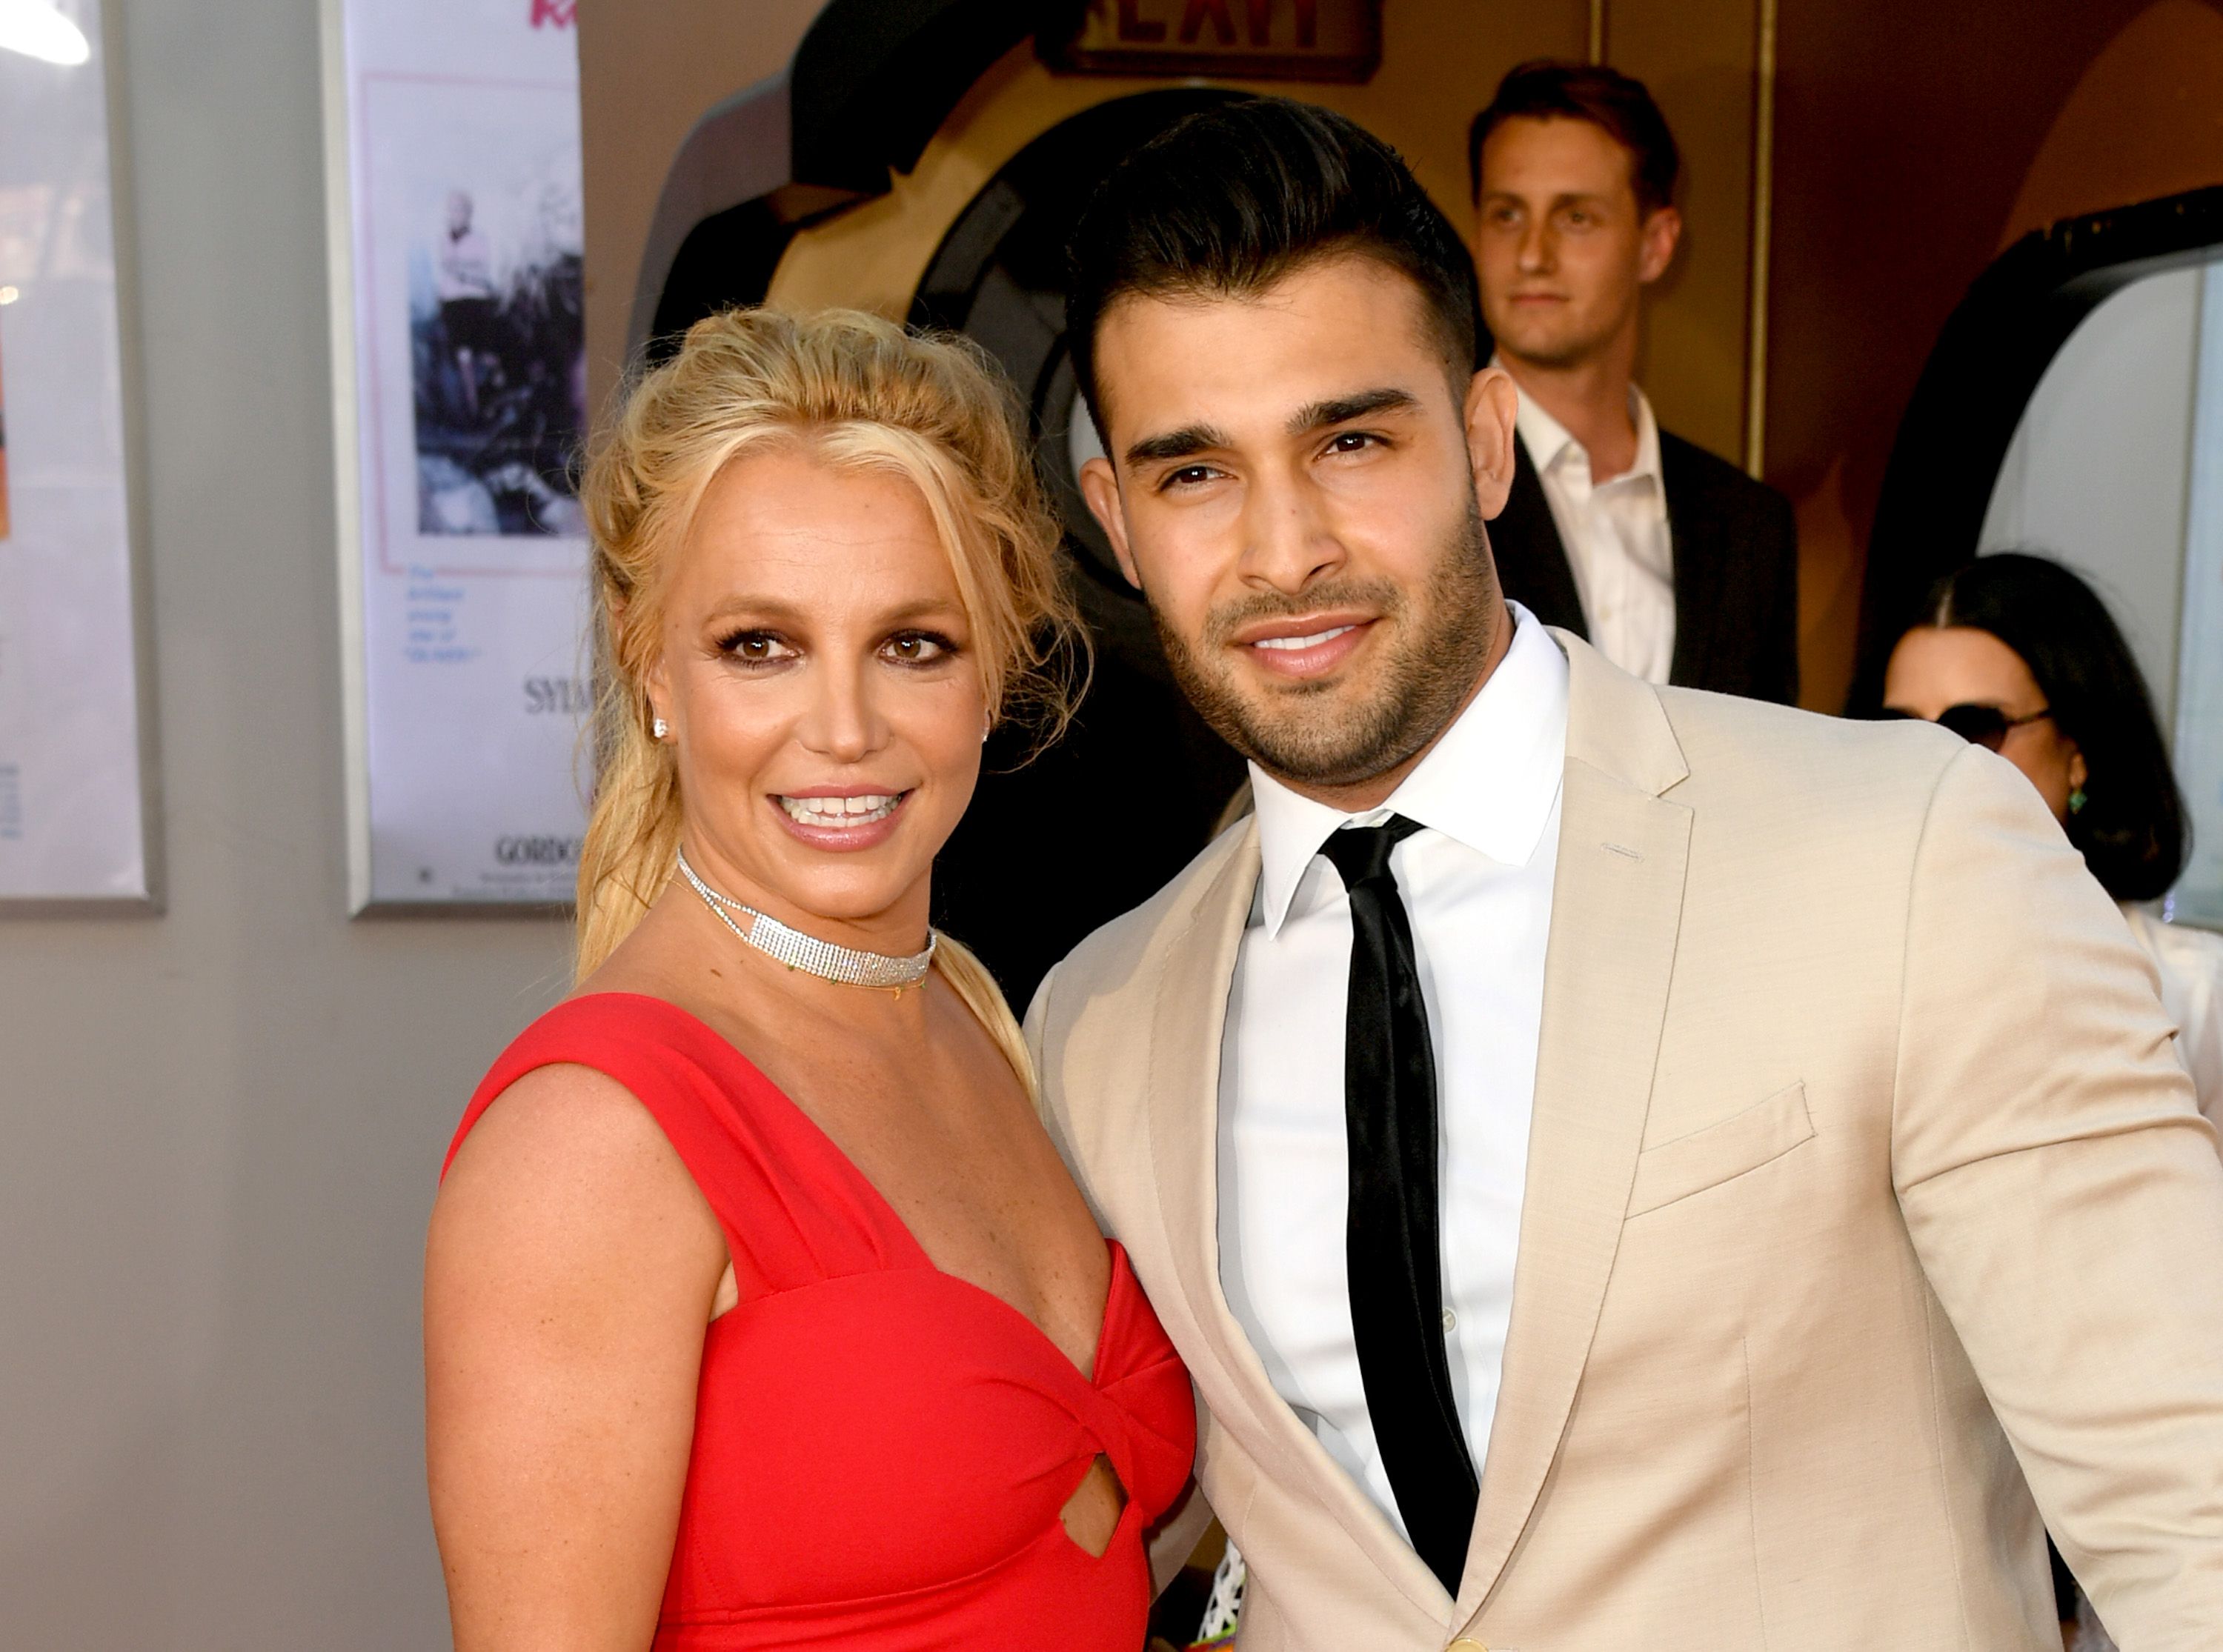 Britney Spears and Sam Asghari at the premiere of Sony Pictures' "One Upon A Time...In Hollywood" at the Chinese Theatre on July 22, 2019. | Source: Getty Images